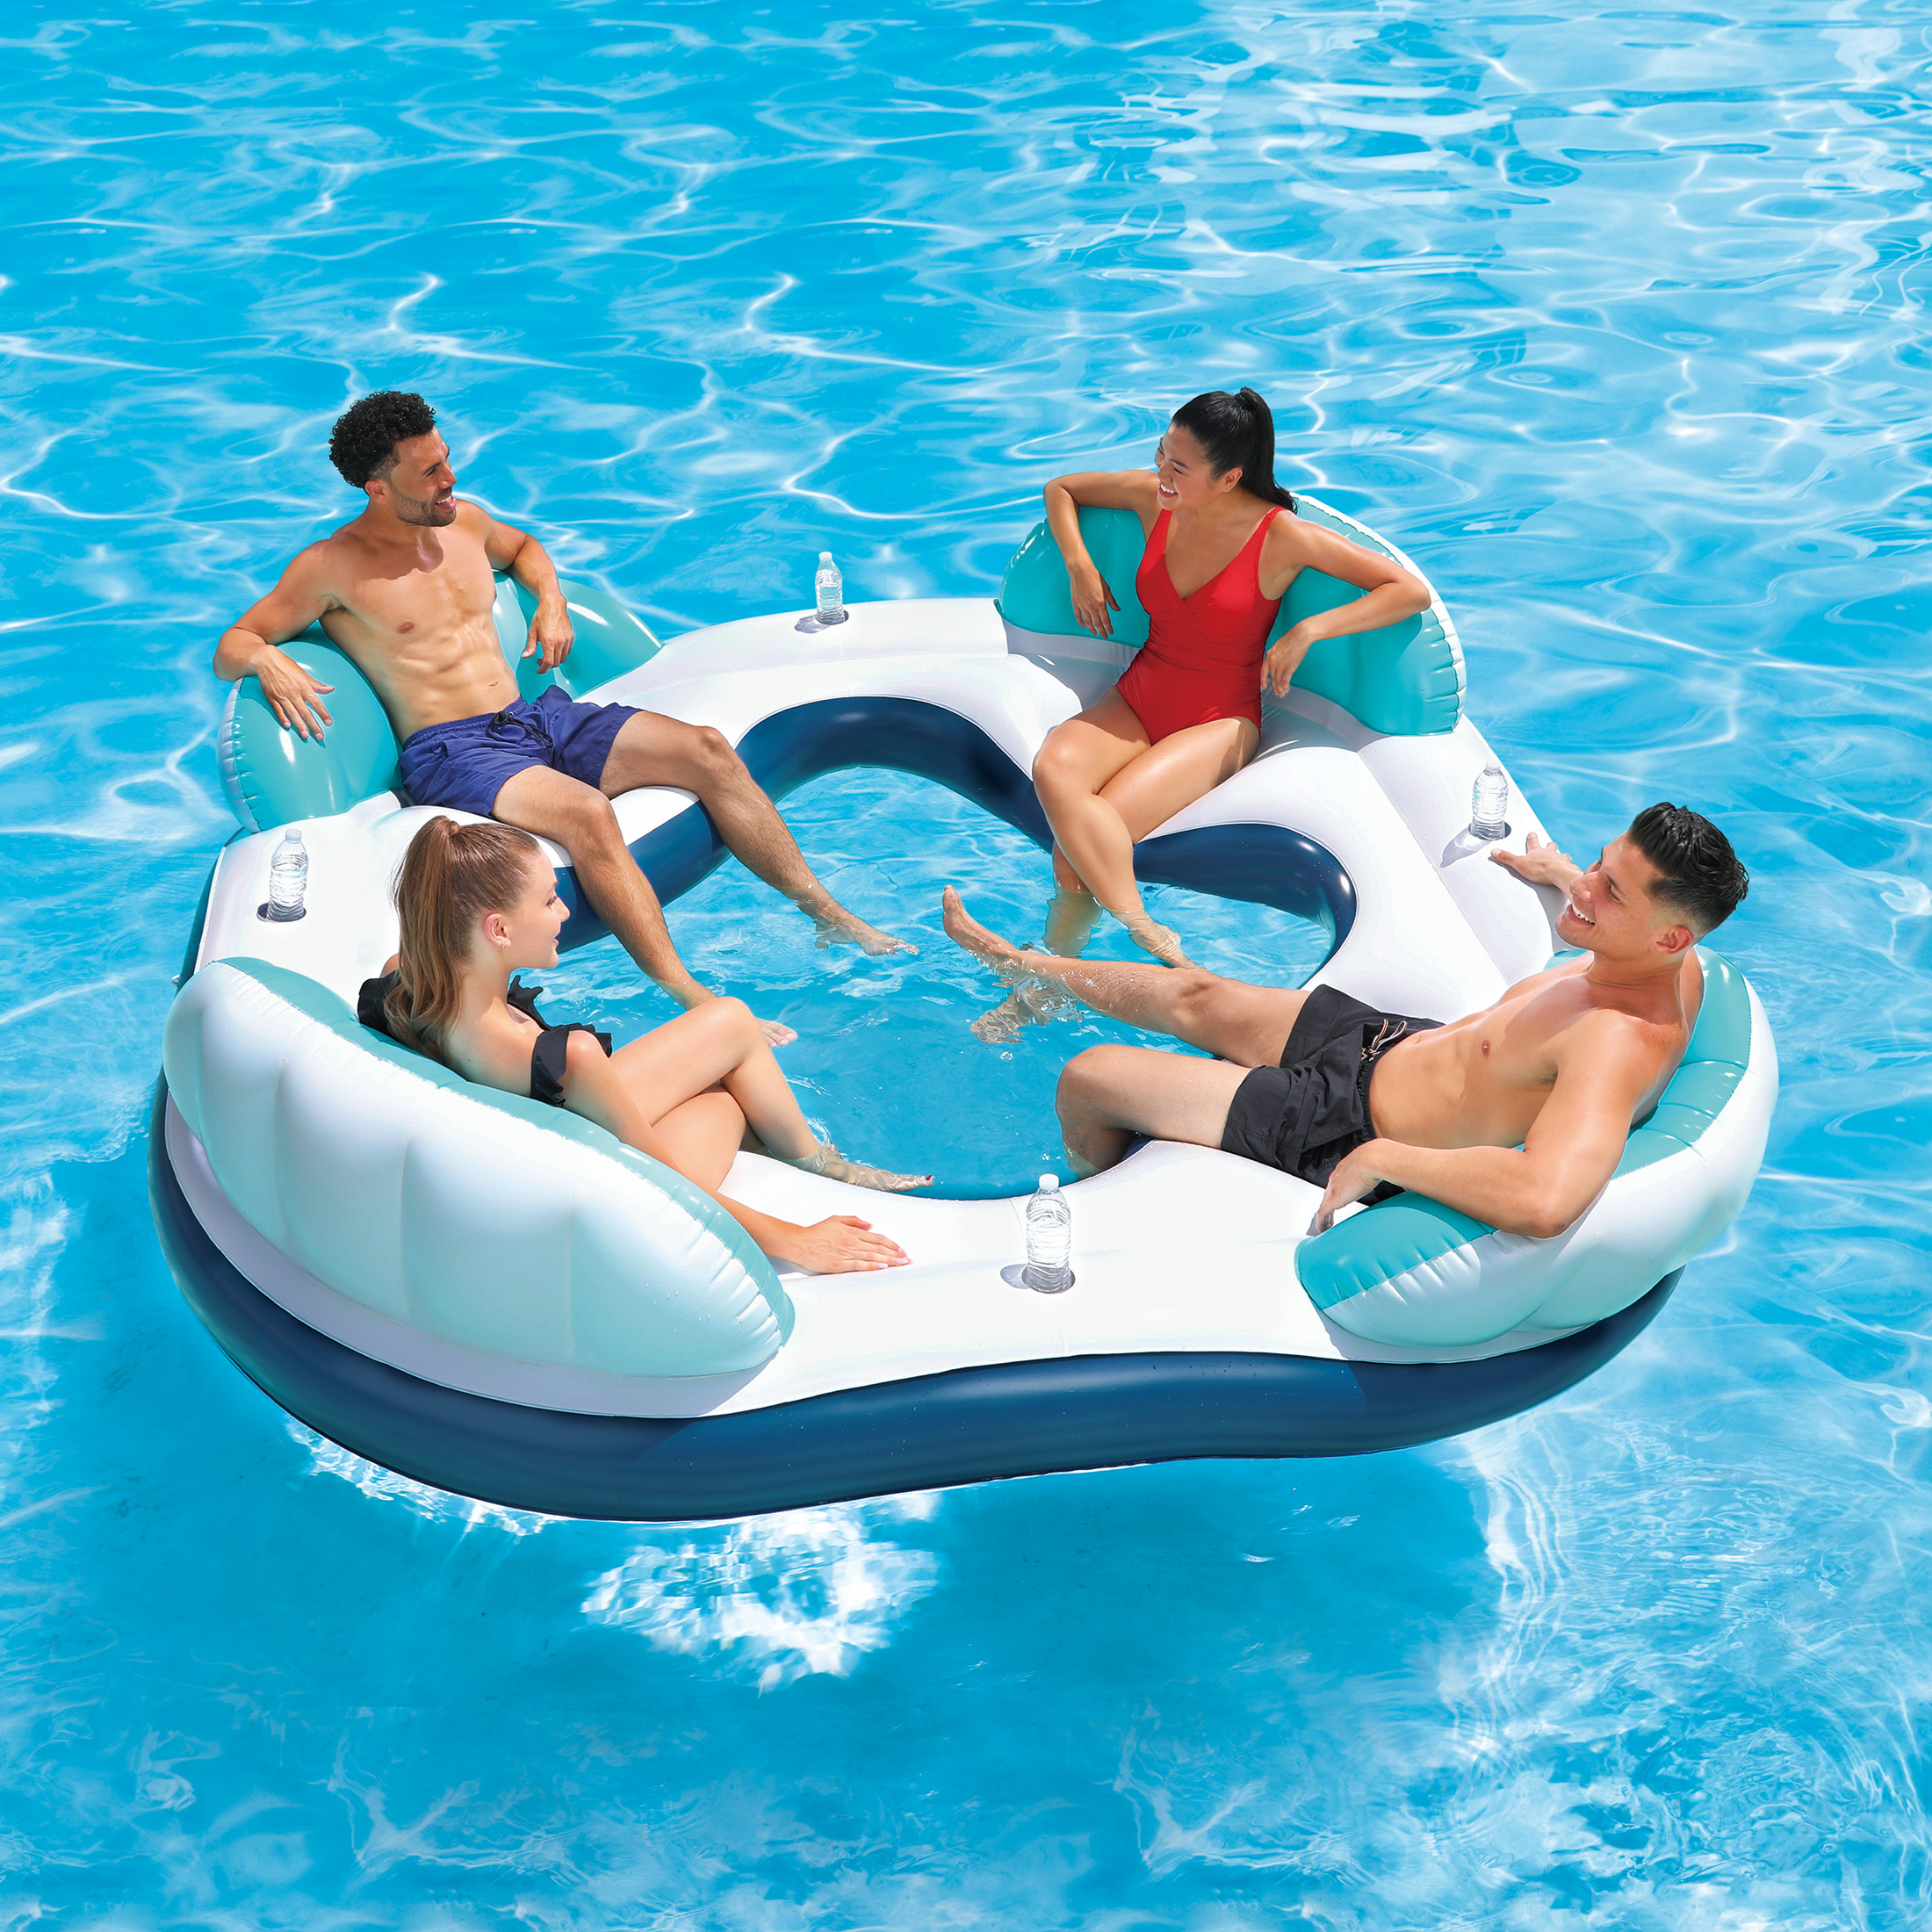 Summer Waves Inflatable 4-Person Island Pool Float, Multicolor, for Adults, Unisex - image 2 of 5